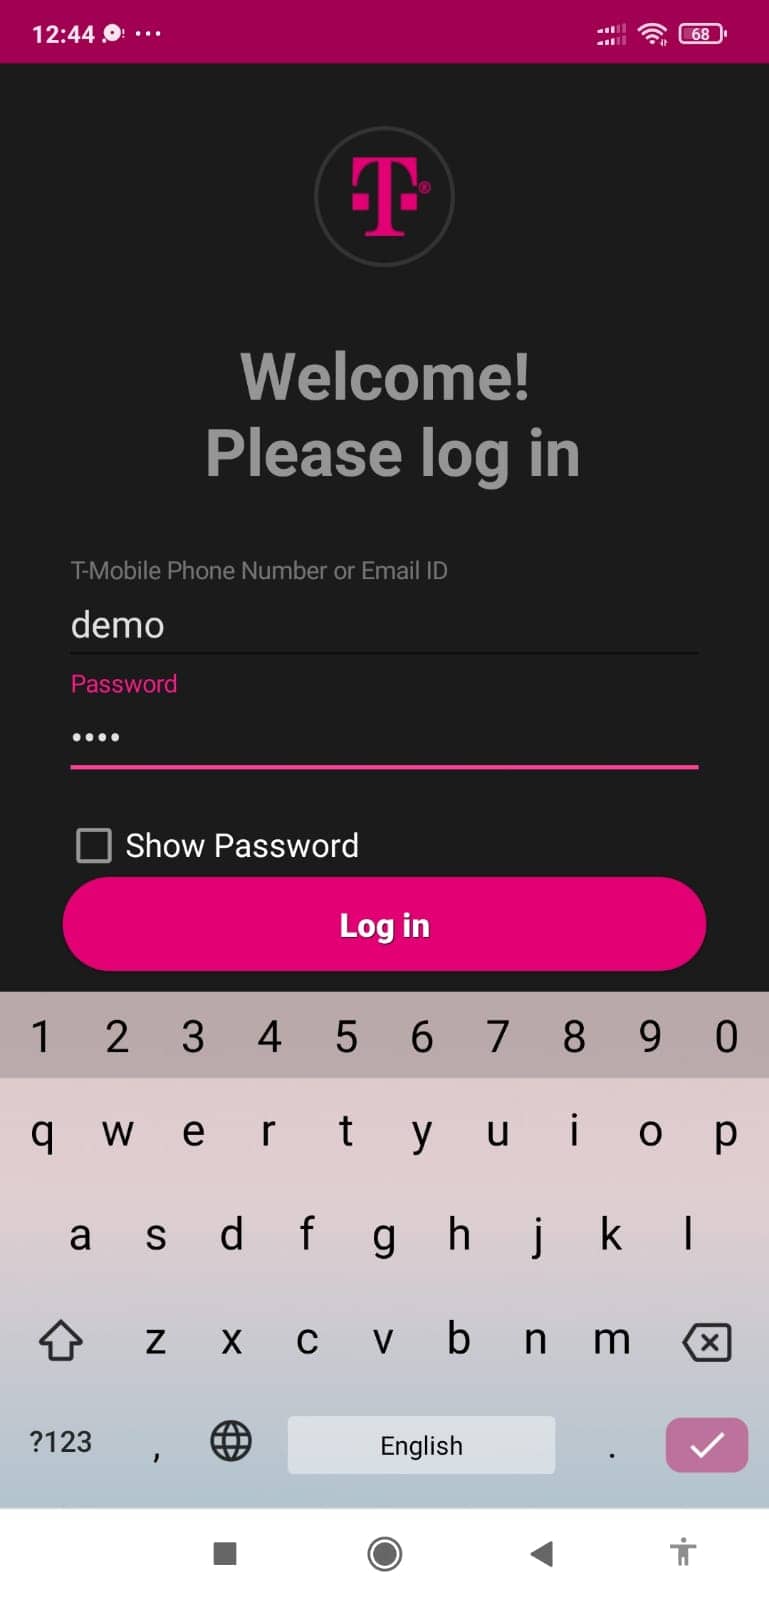 T-Mobile Log in with ID for the first time